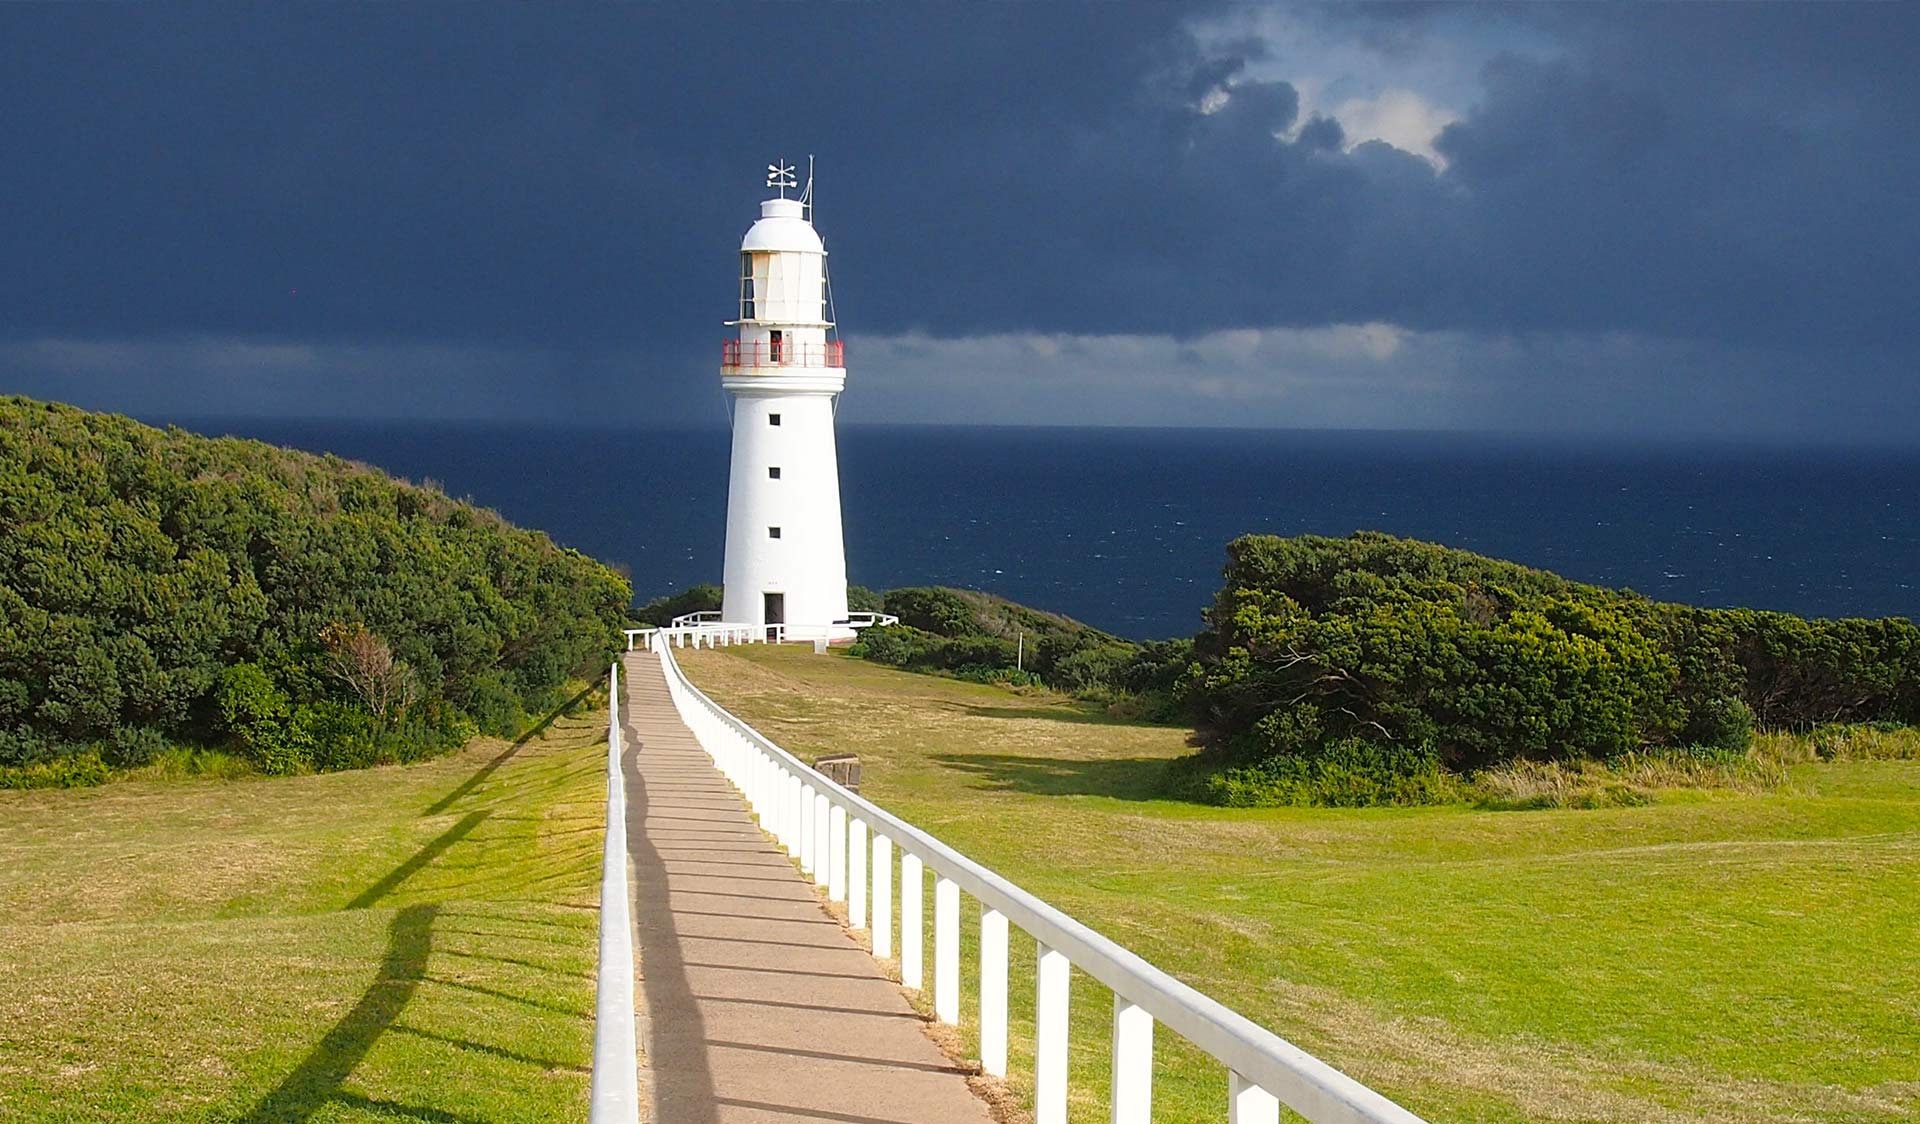 The lighthouse at Cape Otway in the Otway National Park.